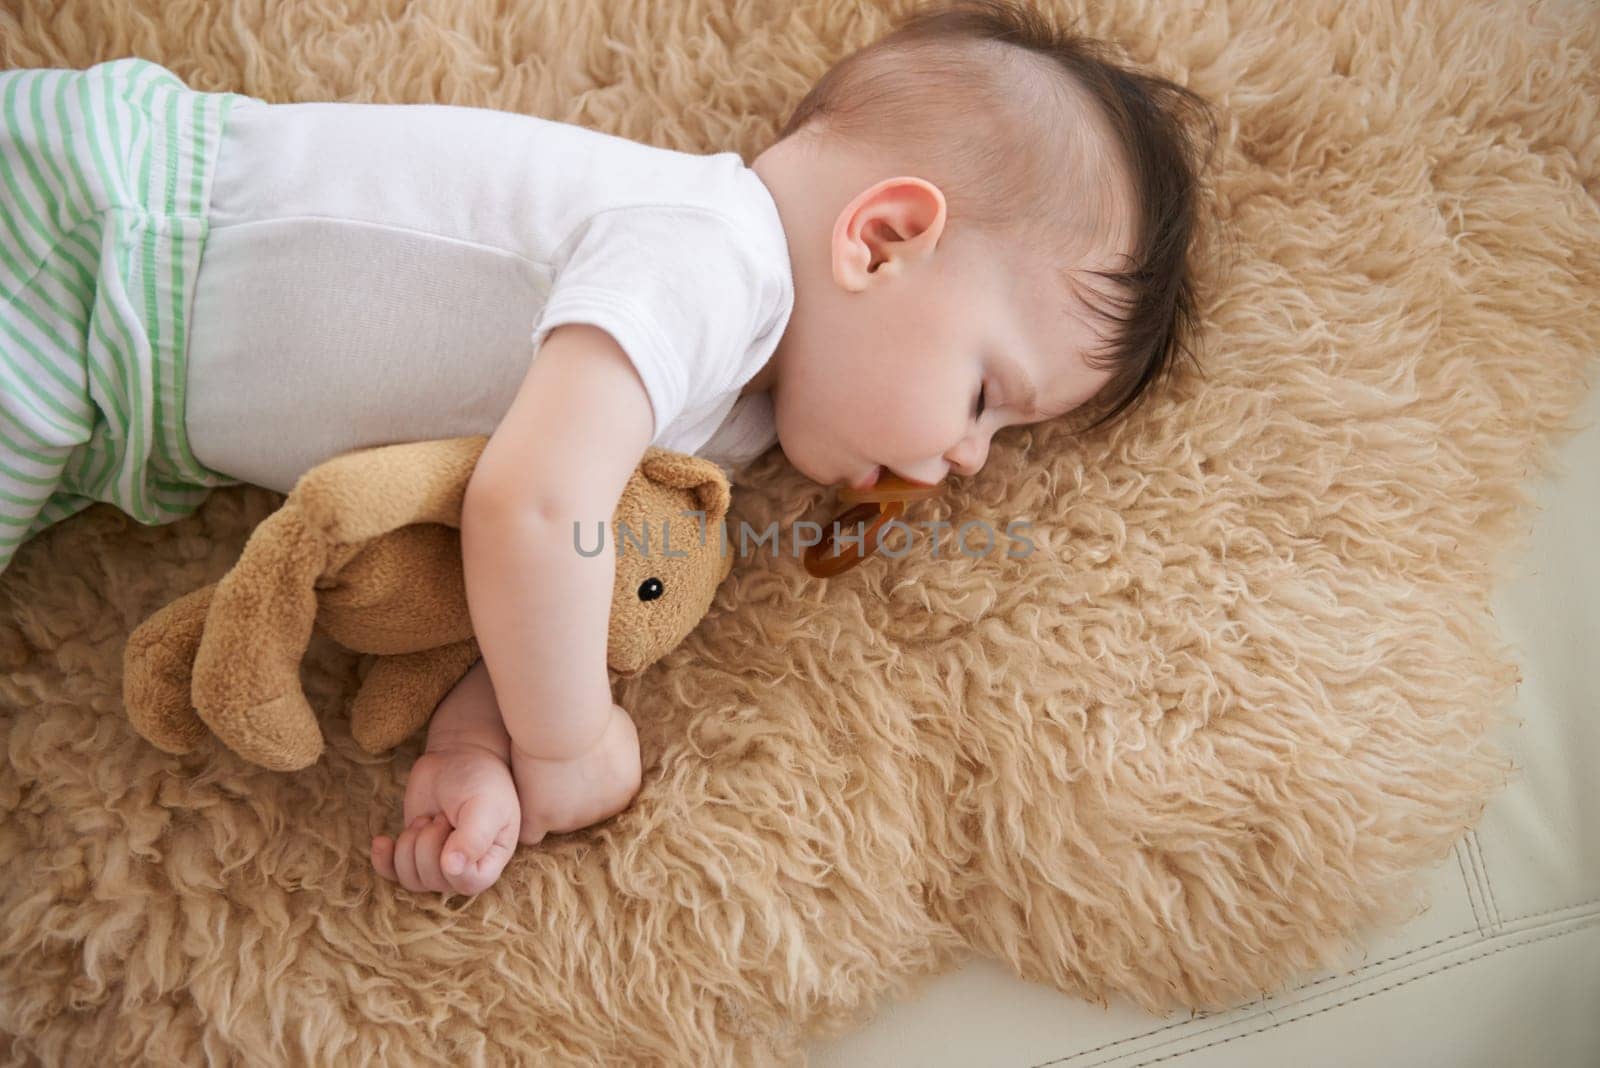 Toddler, sleep and home with teddybear in sofa to rest, tired and relax with dummy and dream. High angle, baby, and nap in couch for child development, growth and innocent with peace for bedtime. by YuriArcurs